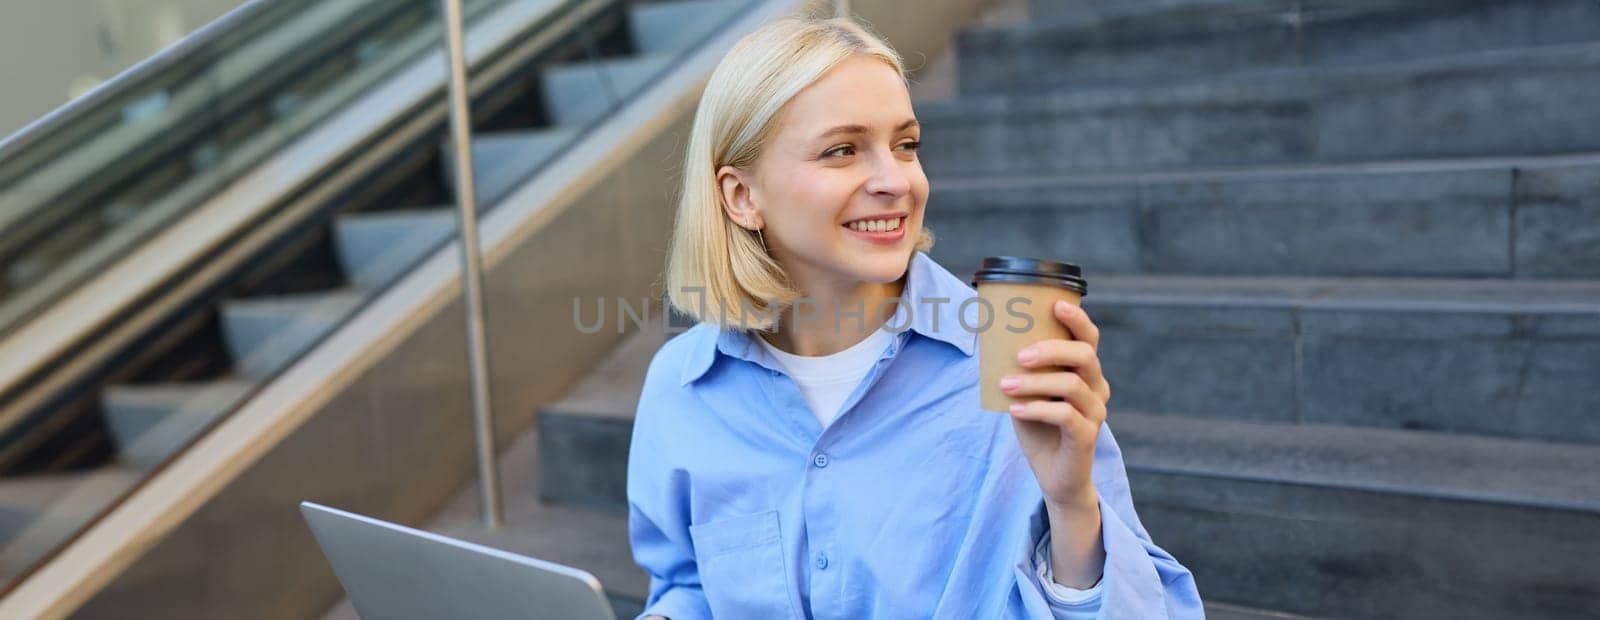 Portrait of blond smiling woman, drinking coffee, using laptop, sitting on campus stairs outside of building, studying, e-learning, connecting to wifi.